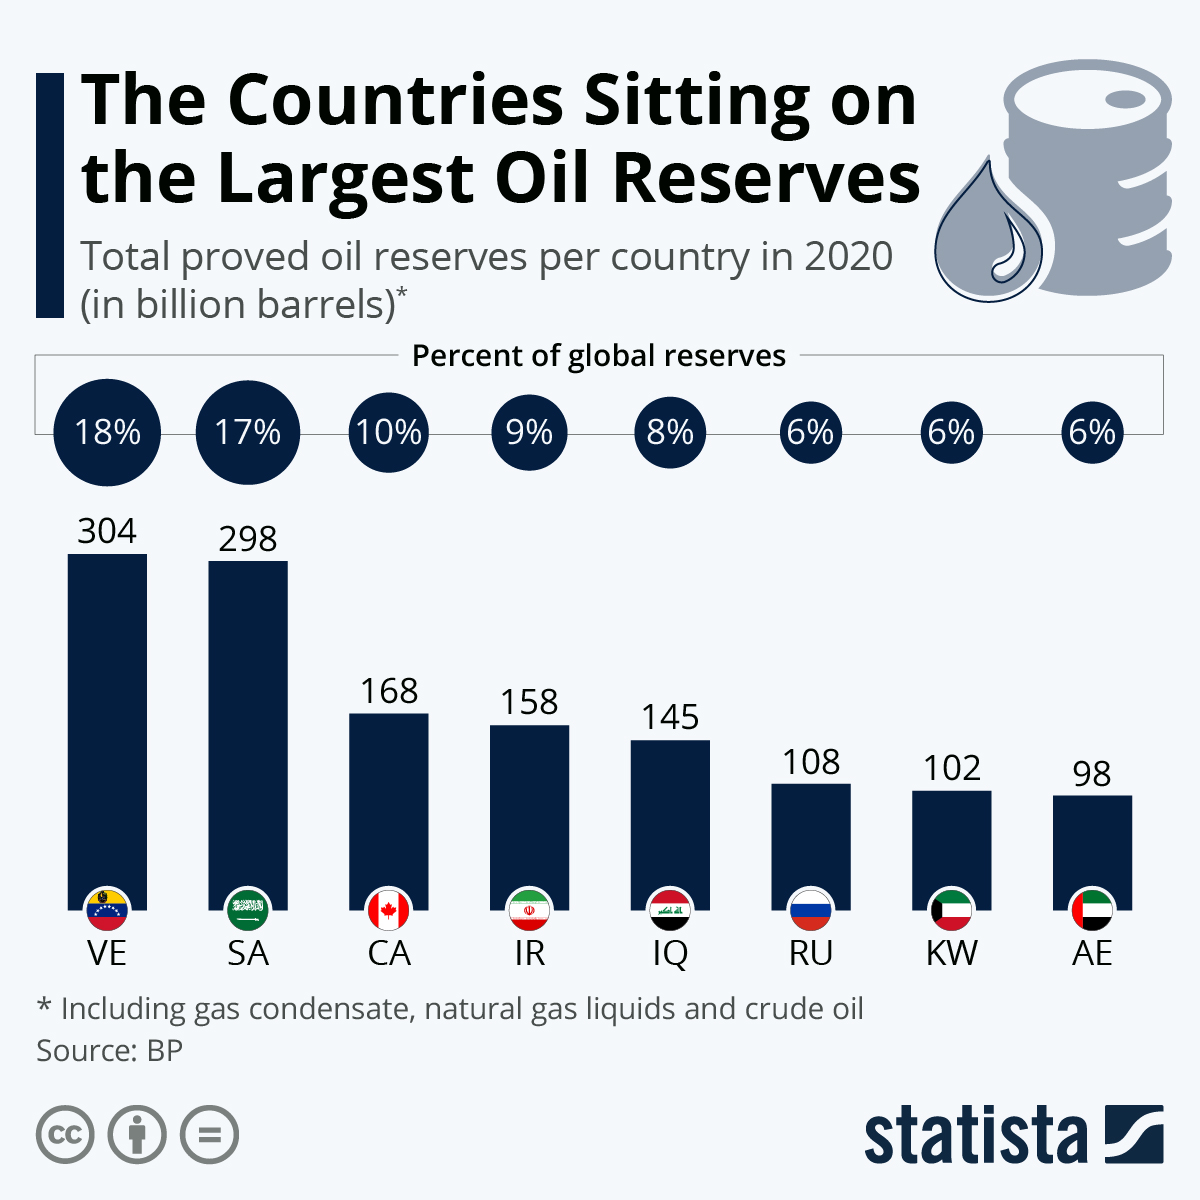 The Countries Sitting on the Largest Oil Reserves